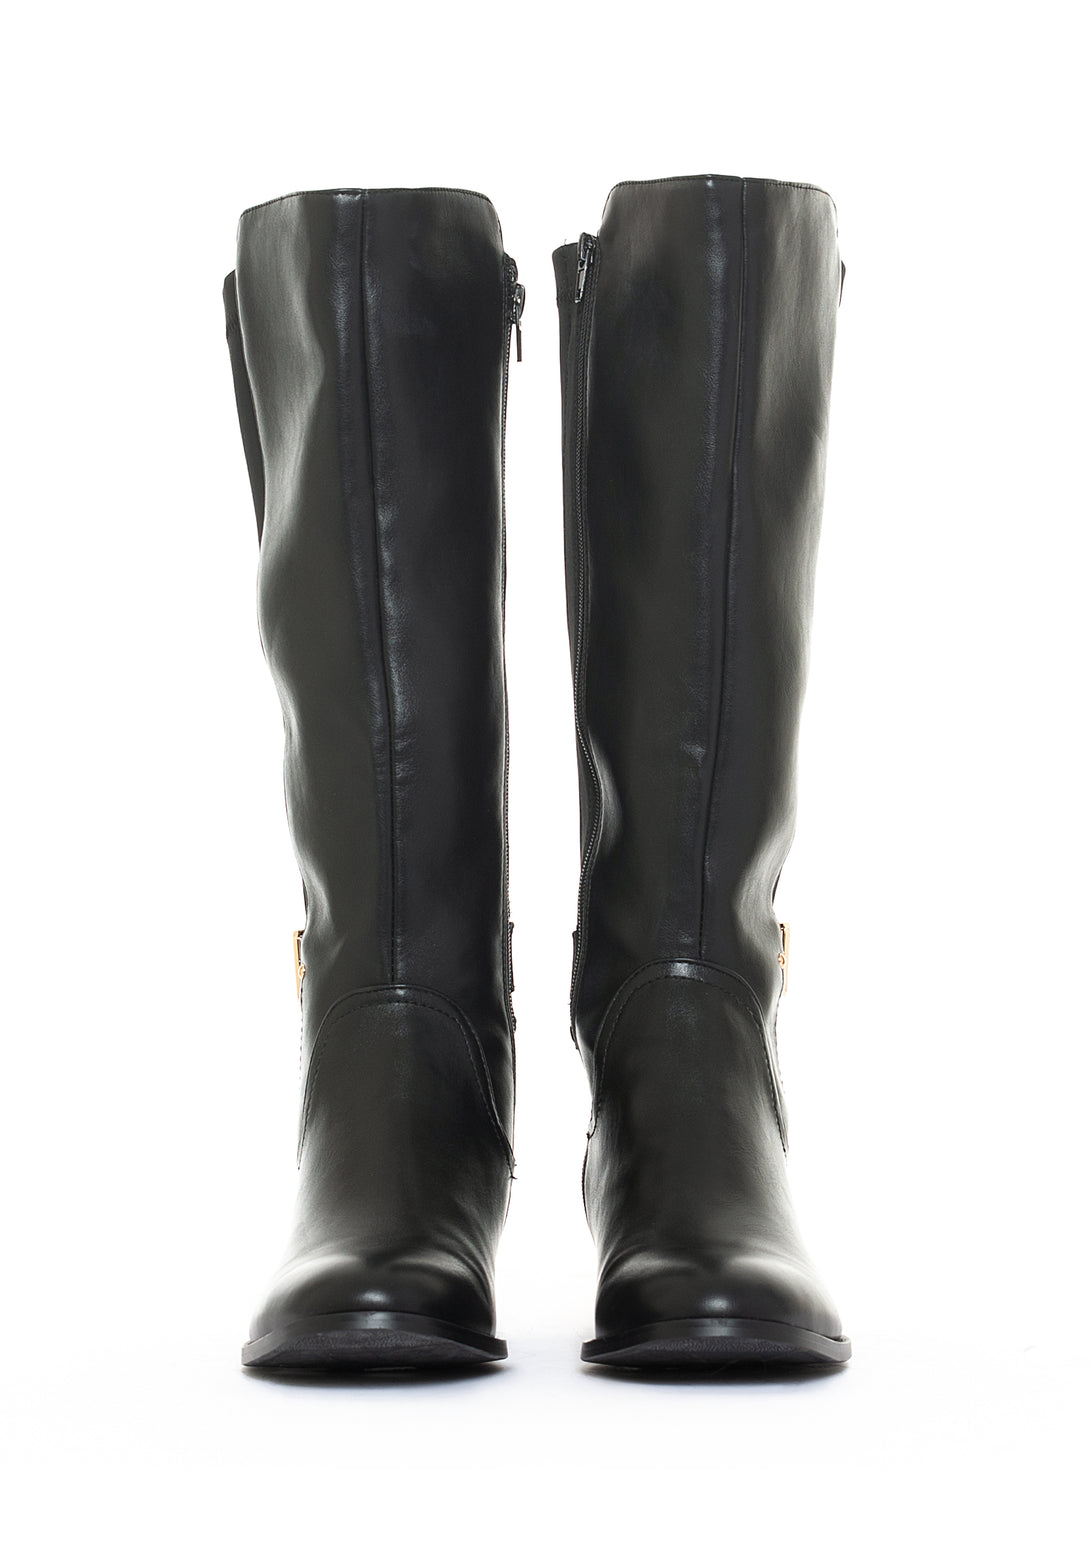 High boots made in eco leather